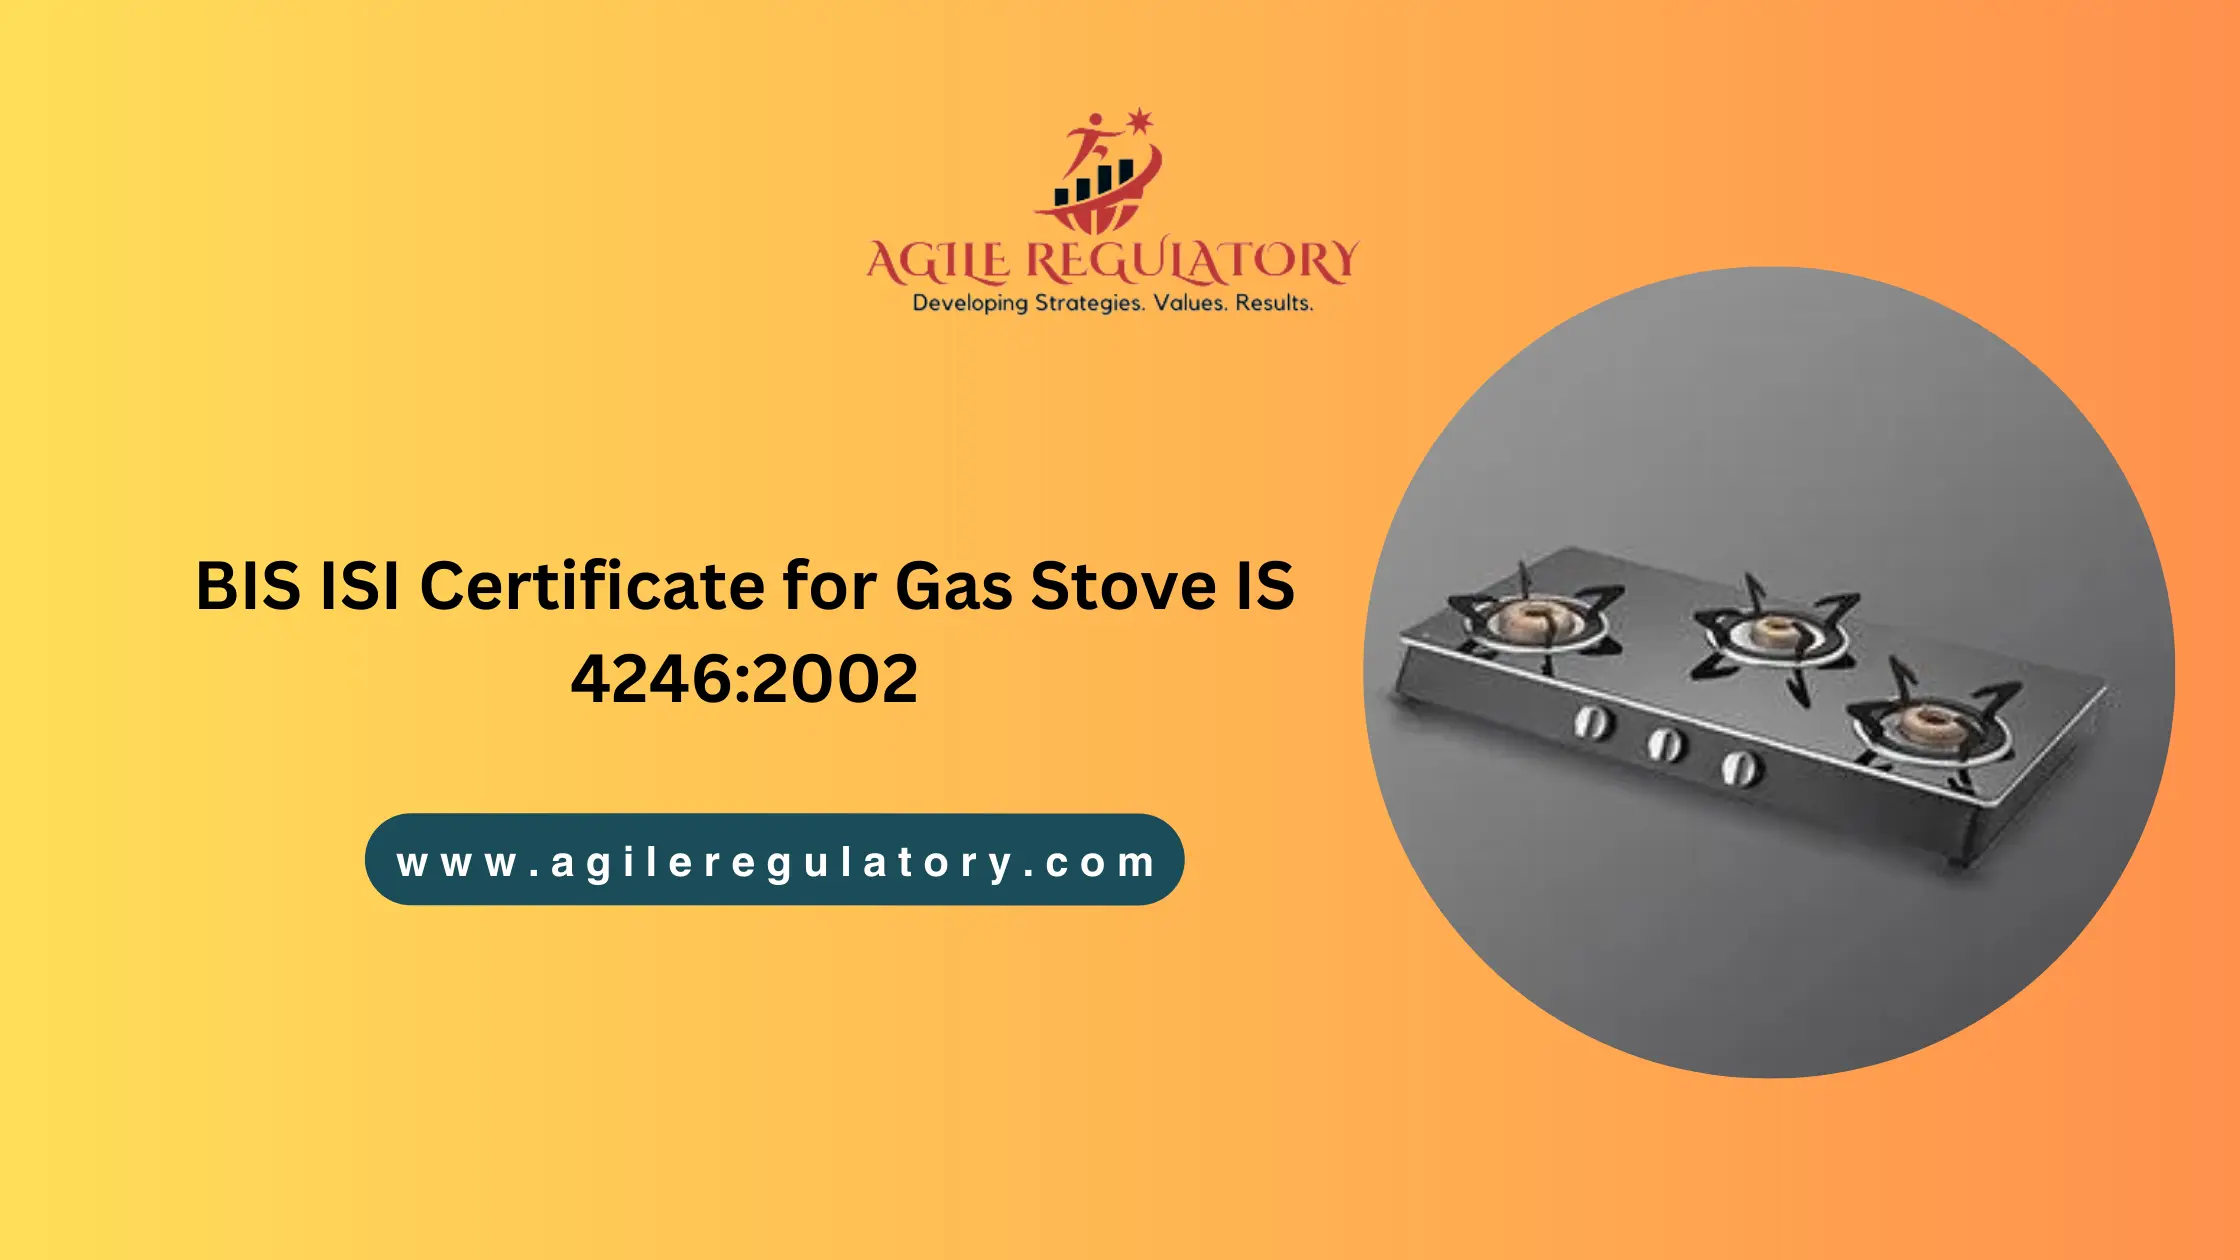 BIS ISI Certificate for Gas Stove IS 4246:2002